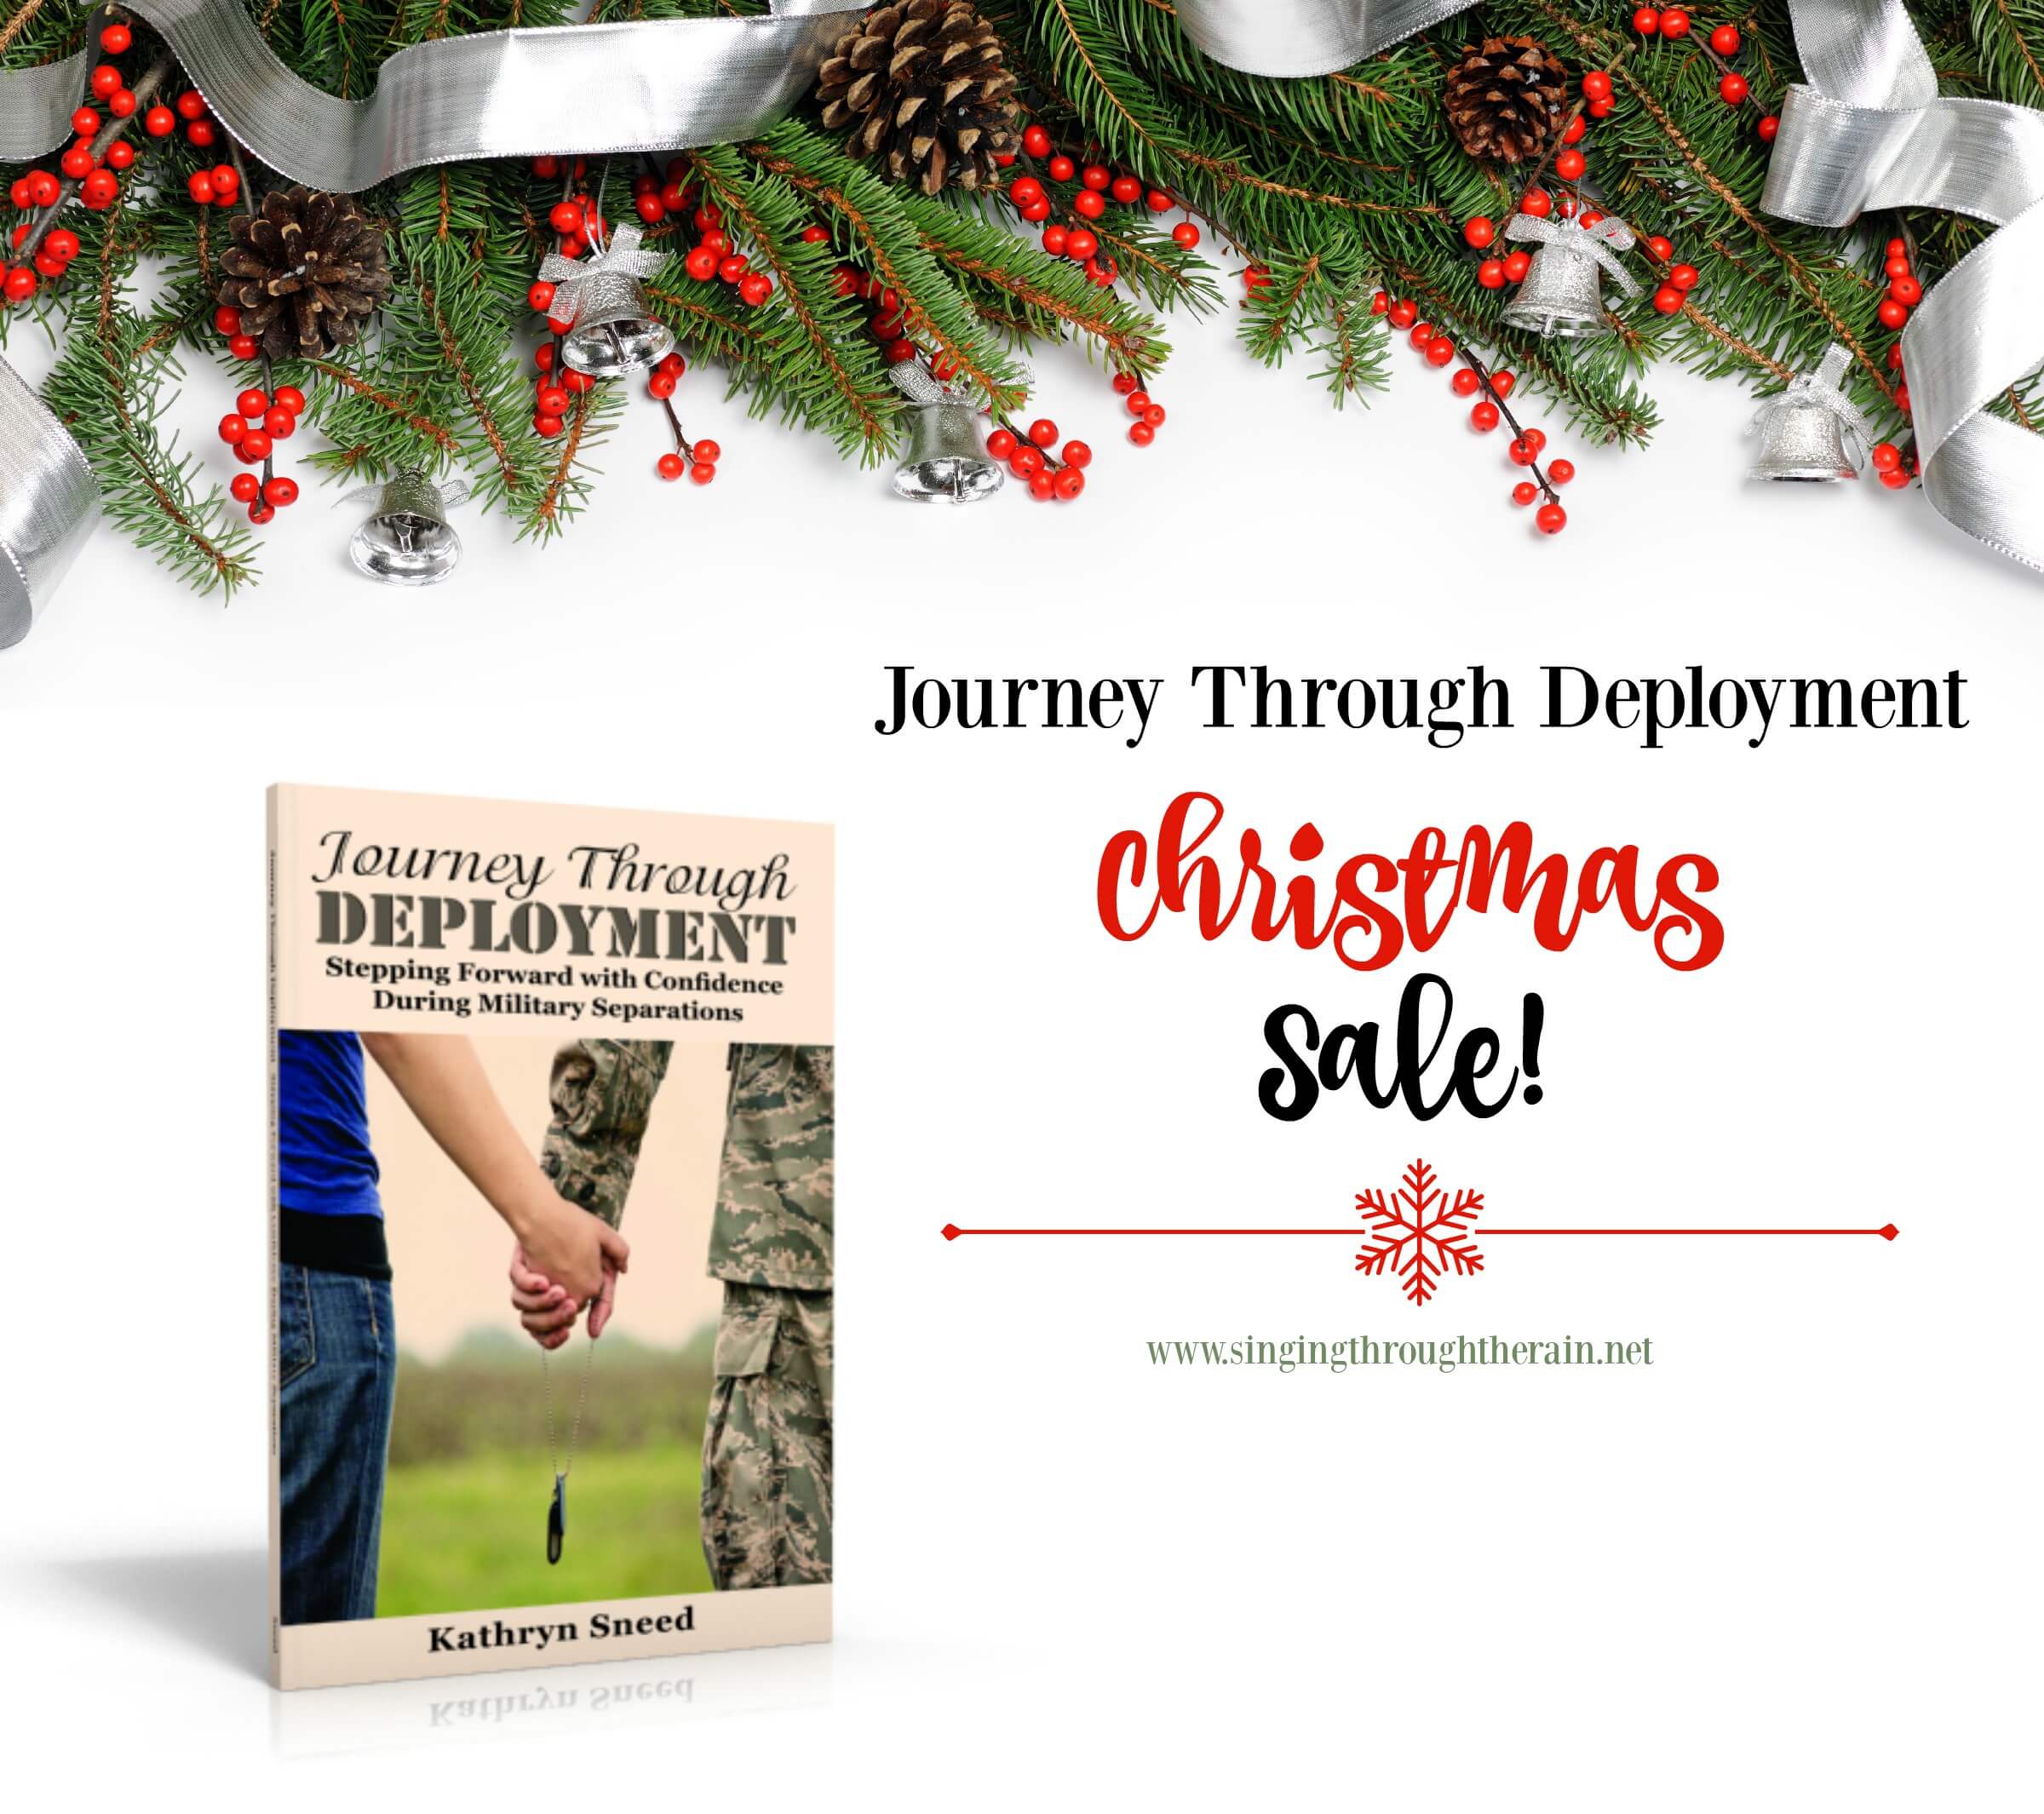 Journey Through Deployment Book Sale and FREE Chapter!